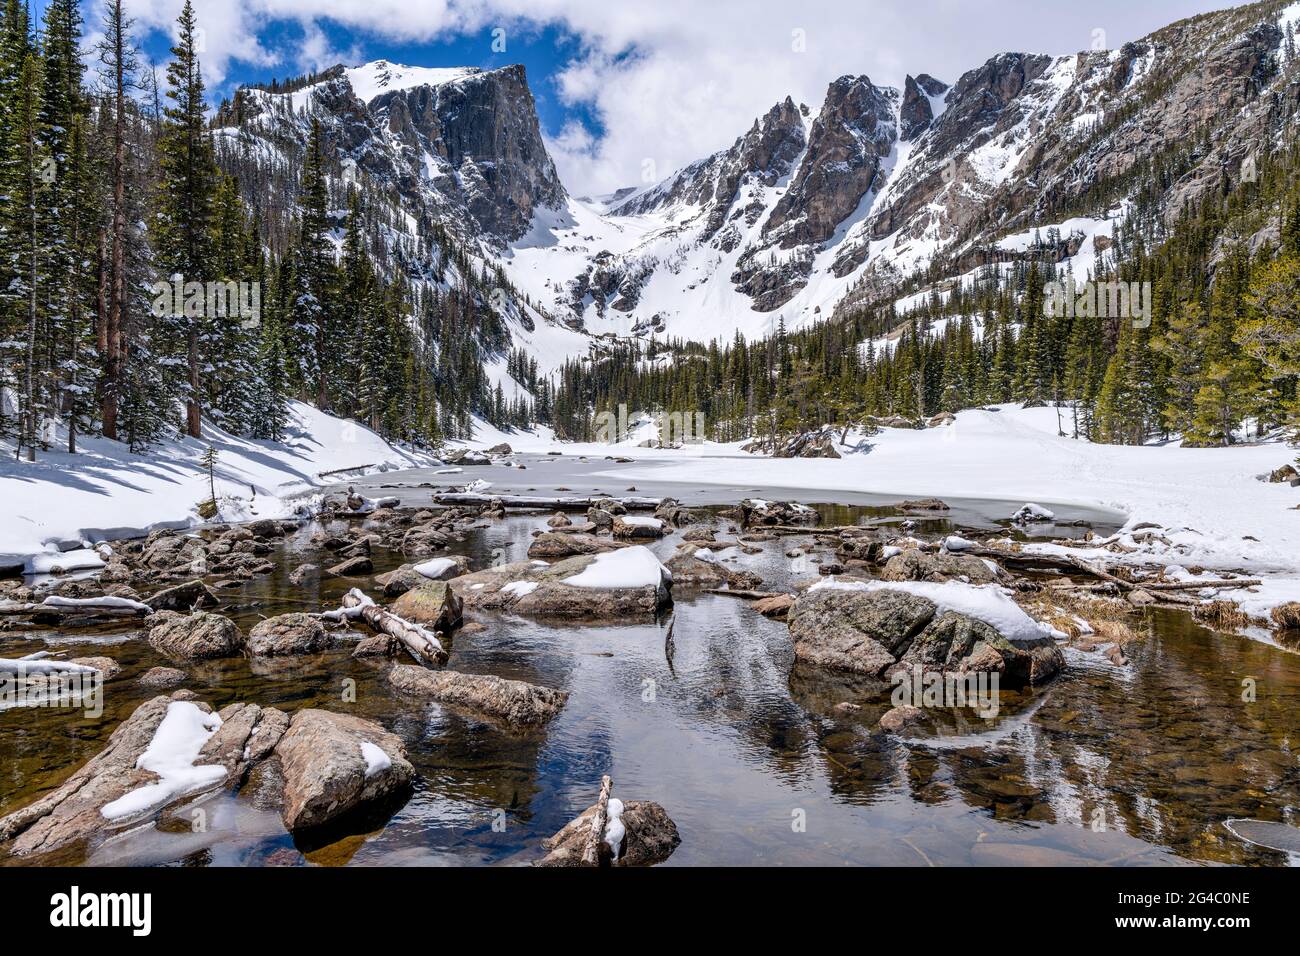 Spring Mountains - Panoramic Spring view of Hallett Peak and Flattop Mountain at still-mostly-frozen Dream Lake, Rocky Mountain National Park, CO, USA. Stock Photo